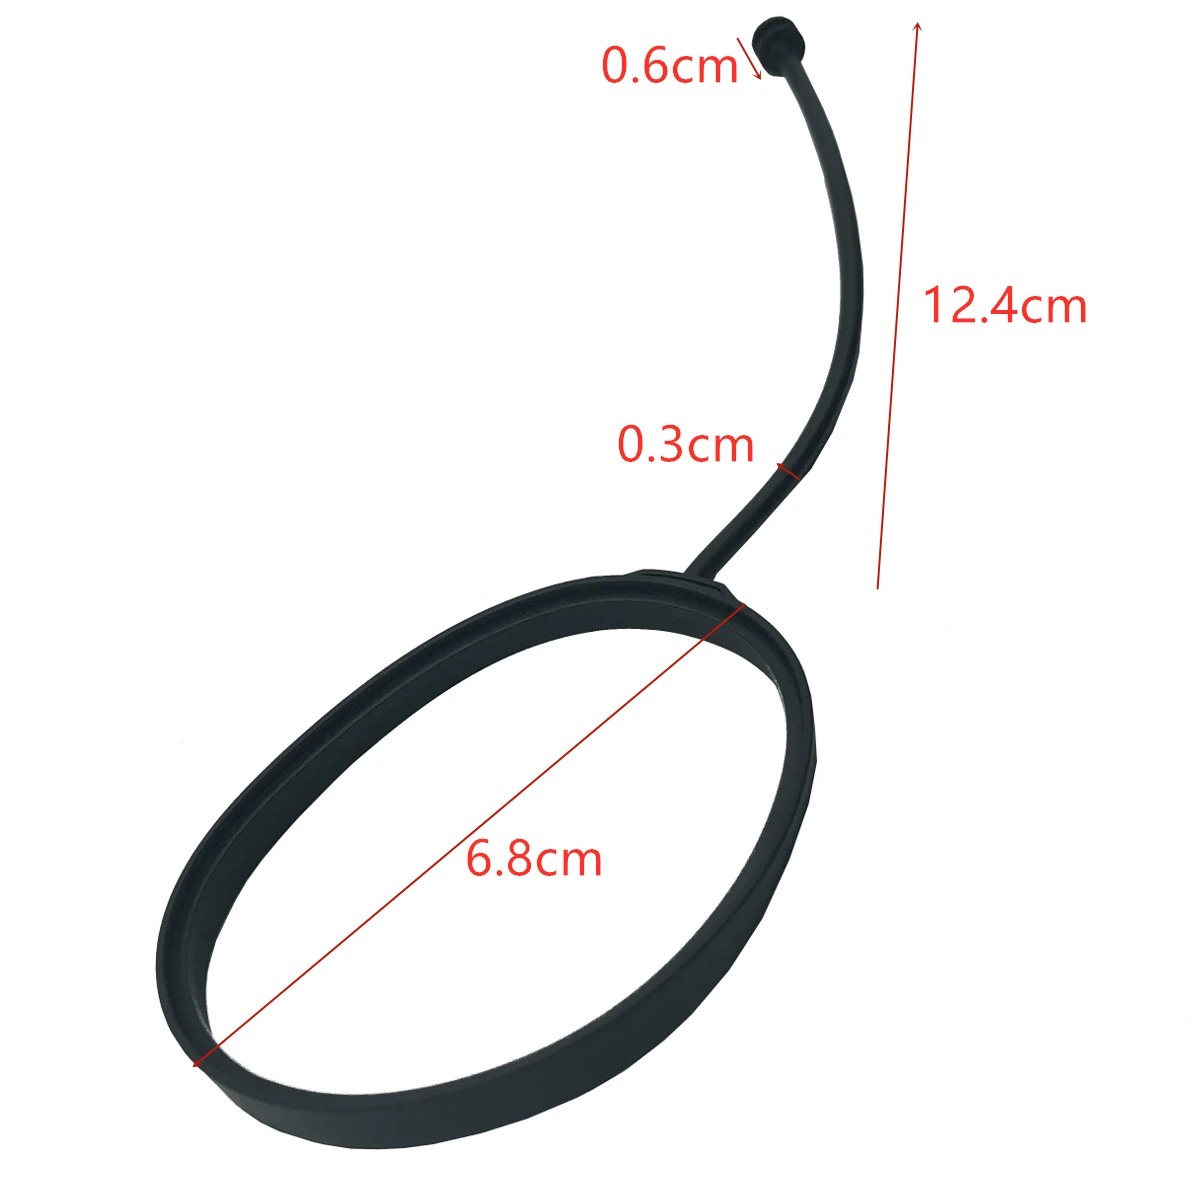 Car Fuel Tank Cap Cover Line Cable Rope Ring 16117193372 For BMW F01 F10 F15 F20 F25 F30 F34 E46 E60 E70 E84 E90 Petrol Diesel